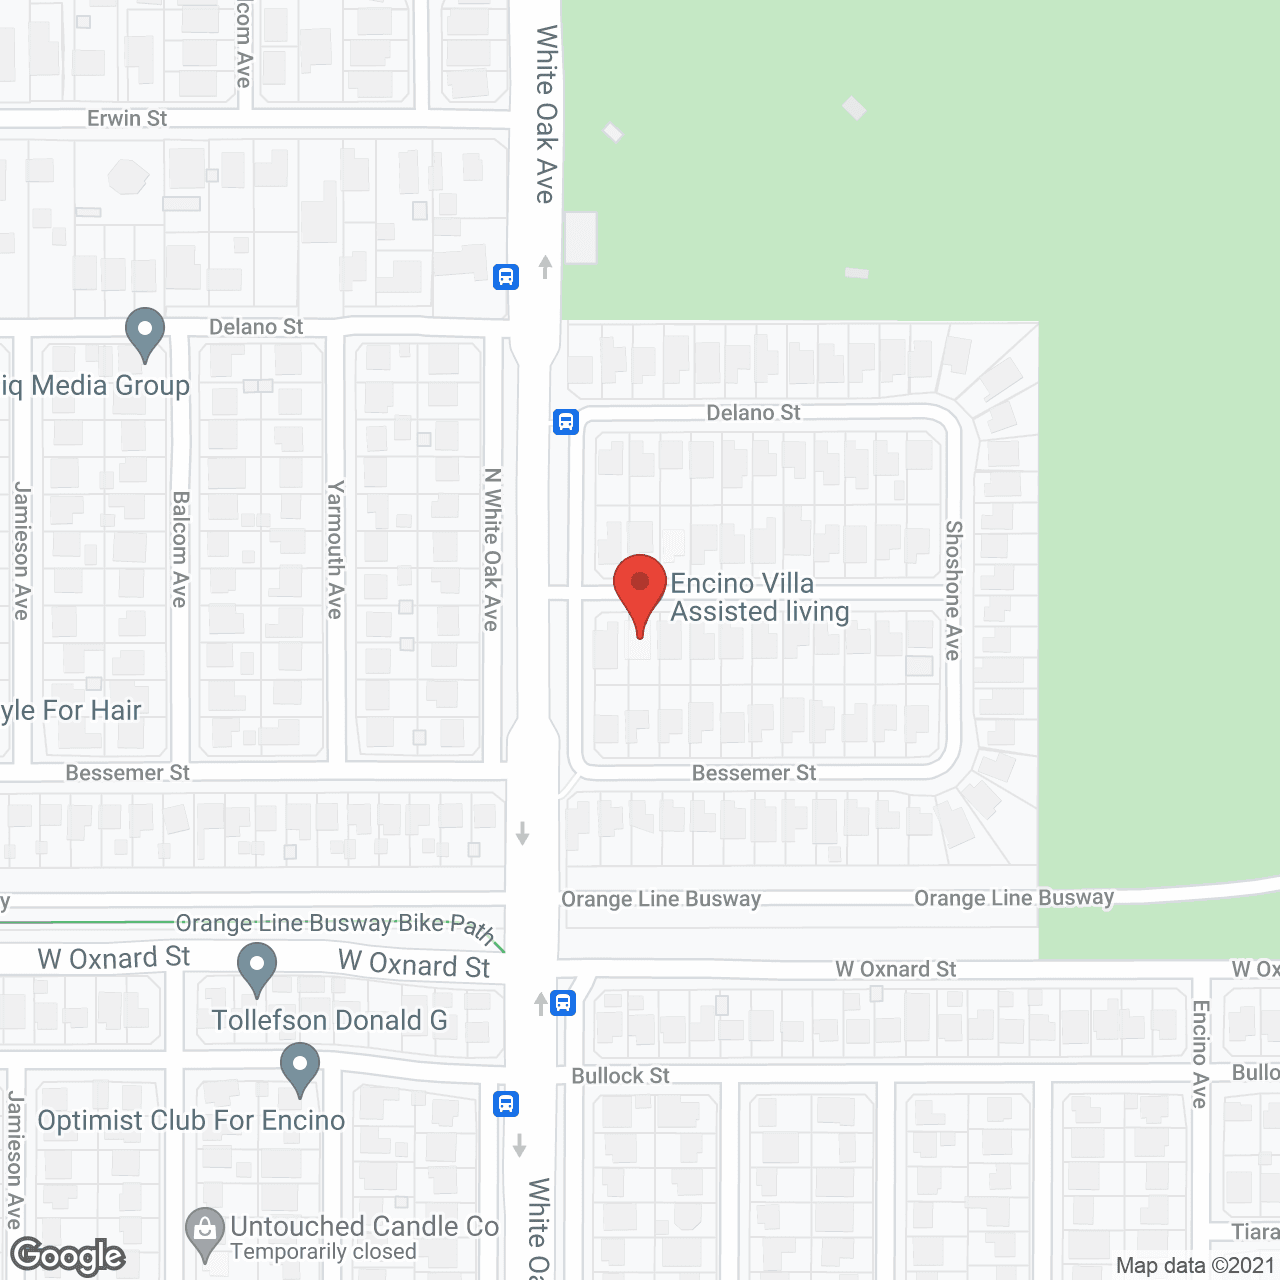 Encino Villa Assisted Living in google map